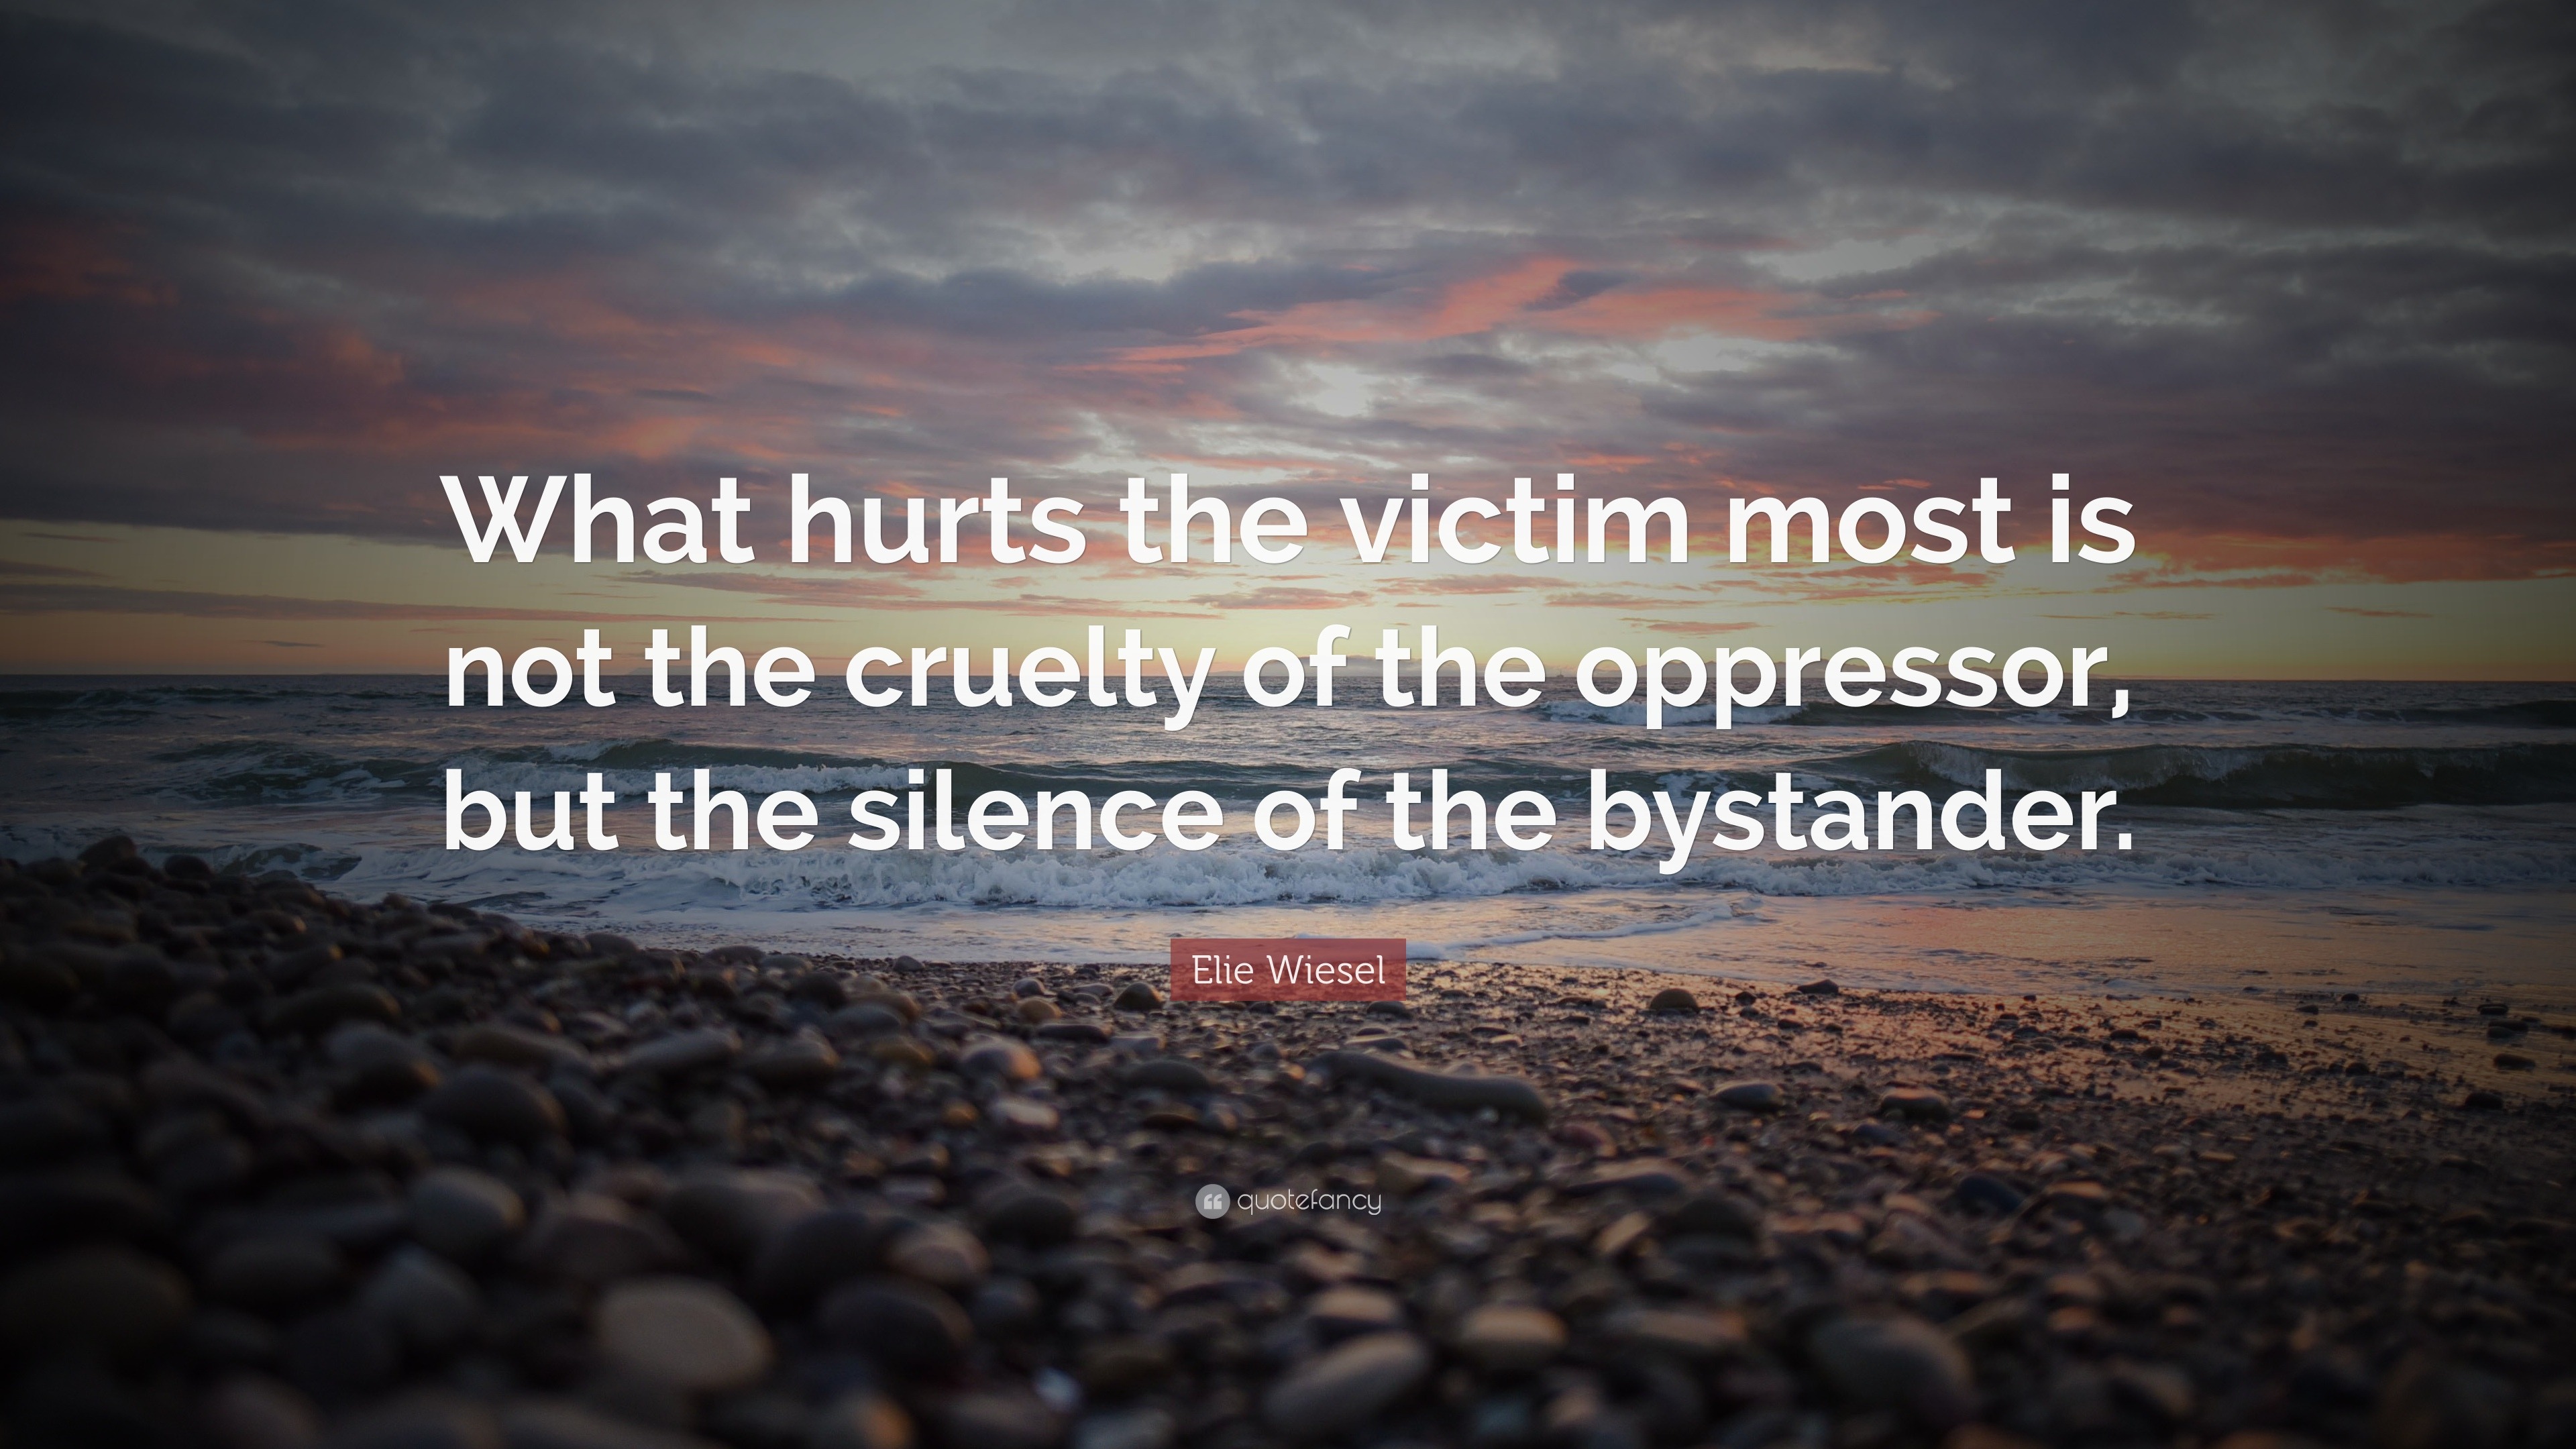 Elie Wiesel Quote: “What hurts the victim most is not the cruelty of